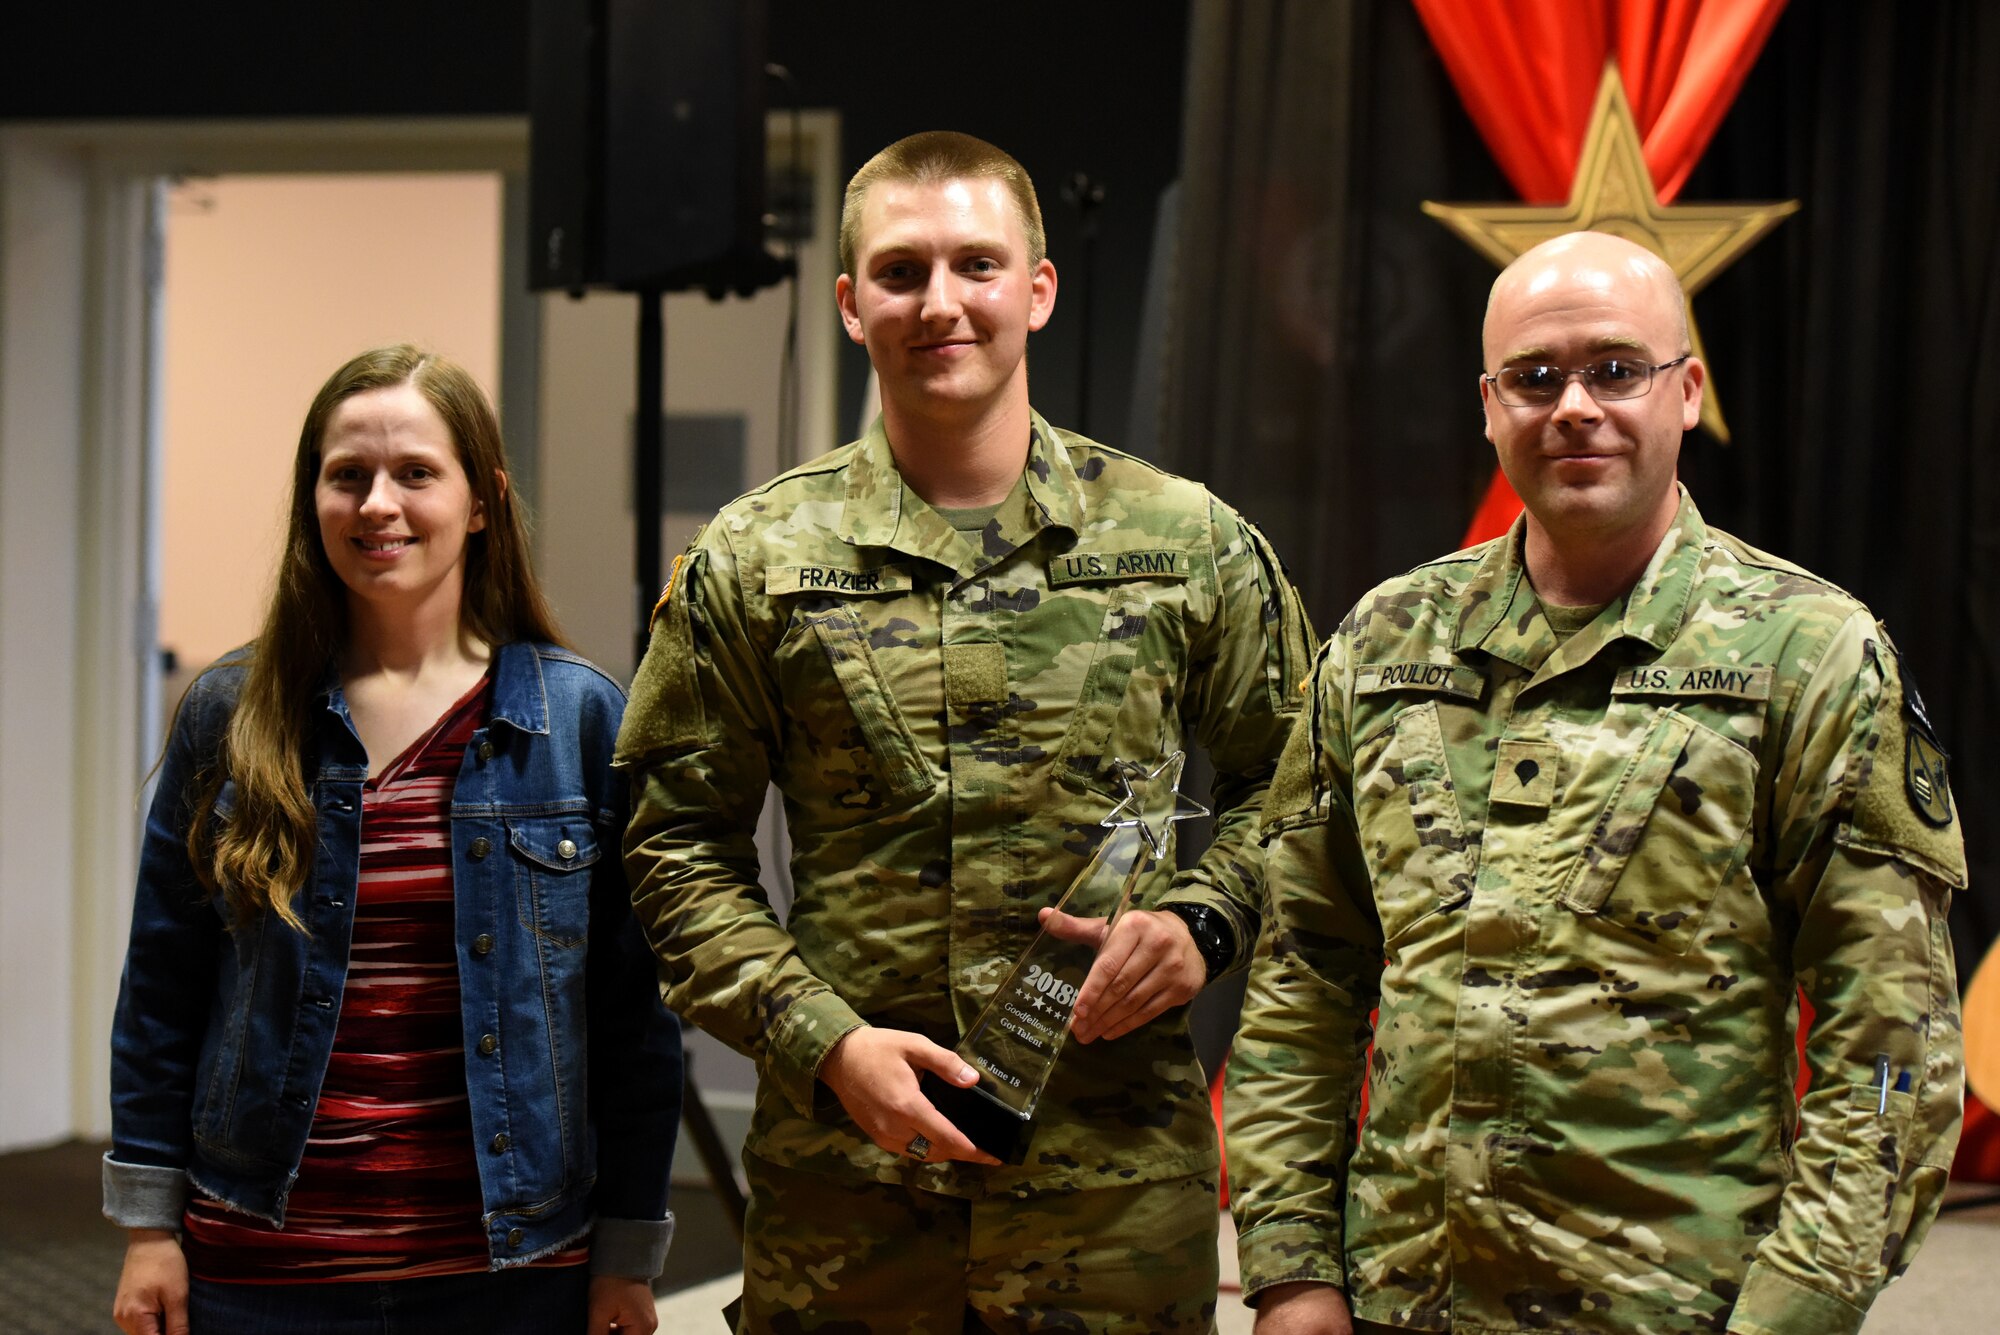 Goodfellow’s Got Talent winners, Sariah Berglund, U.S. Army Pvt. Chris Frazier, 344th Military Battalion trainee, and U.S. Army Spc. Michael Pouliot, 344th Military Intelligence Battalion trainee, braved the audience and performed at the competition in the Event Center on Goodfellow Air Force Base, Texas, June 8, 2018. The participants showcased a variety of talents, including, stand-up comedy, singing, playing guitar and other instruments. (U.S. Air Force photo by Airman 1st Class Seraiah Hines/Released)